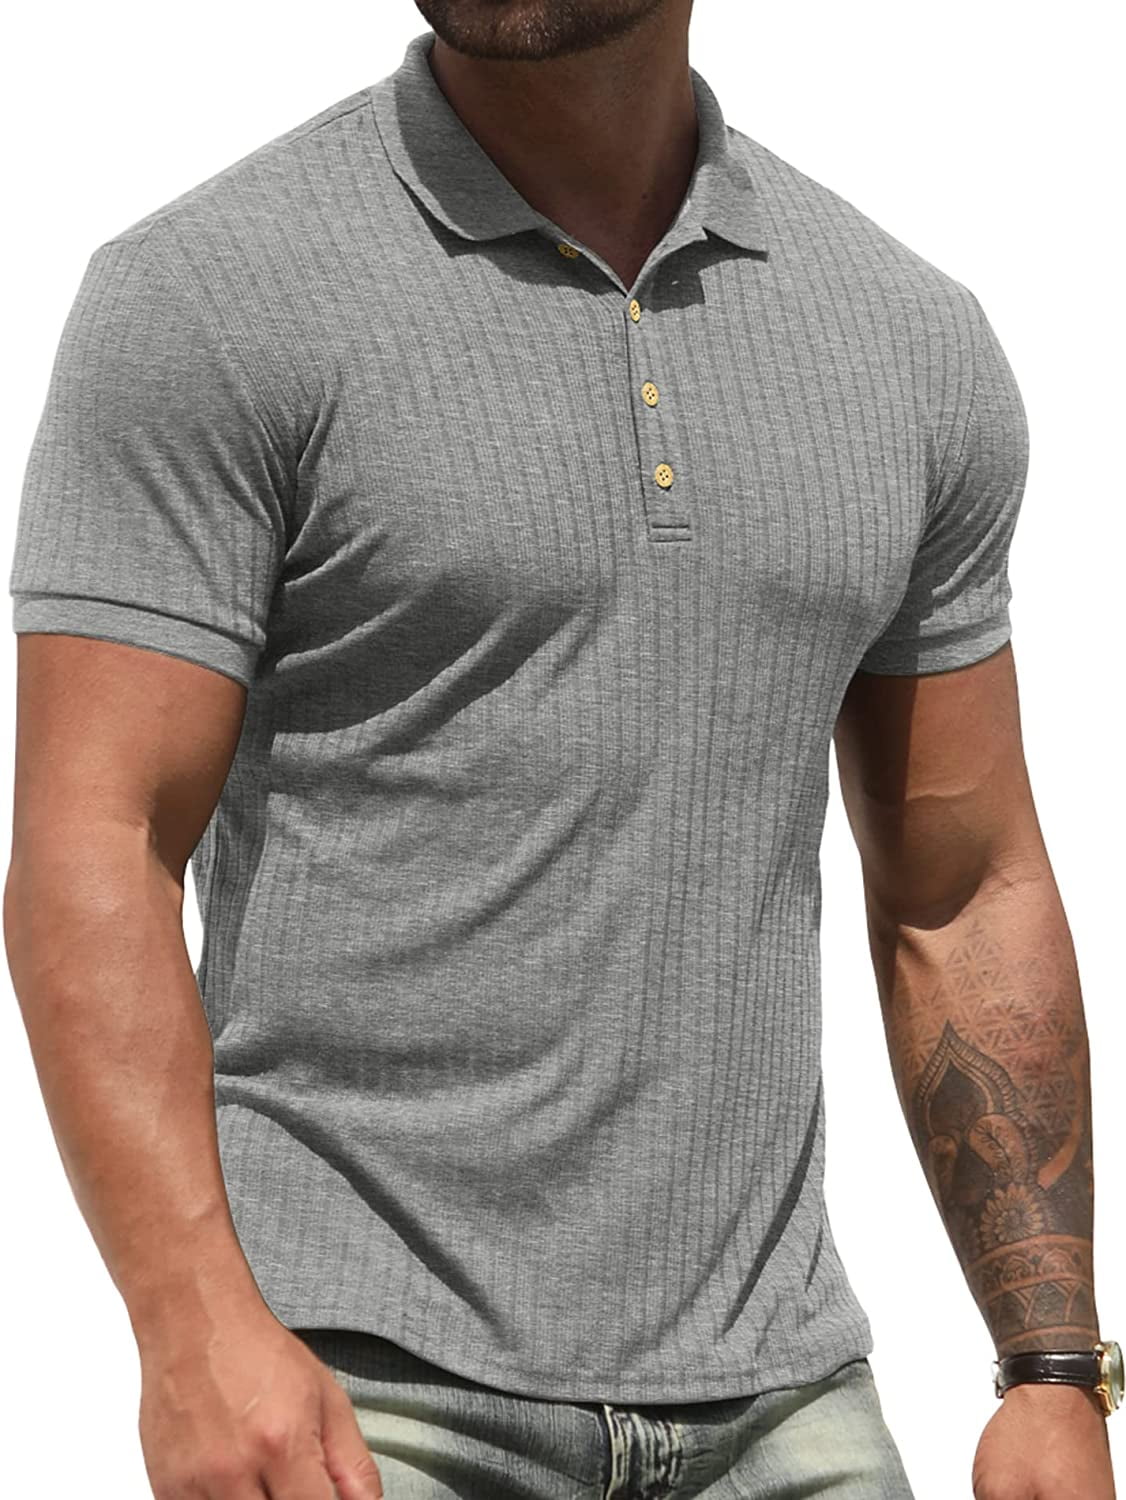 Iceglad Men's Polo Shirts Short Sleeve Casual Slim Fit Workout Shirts ...